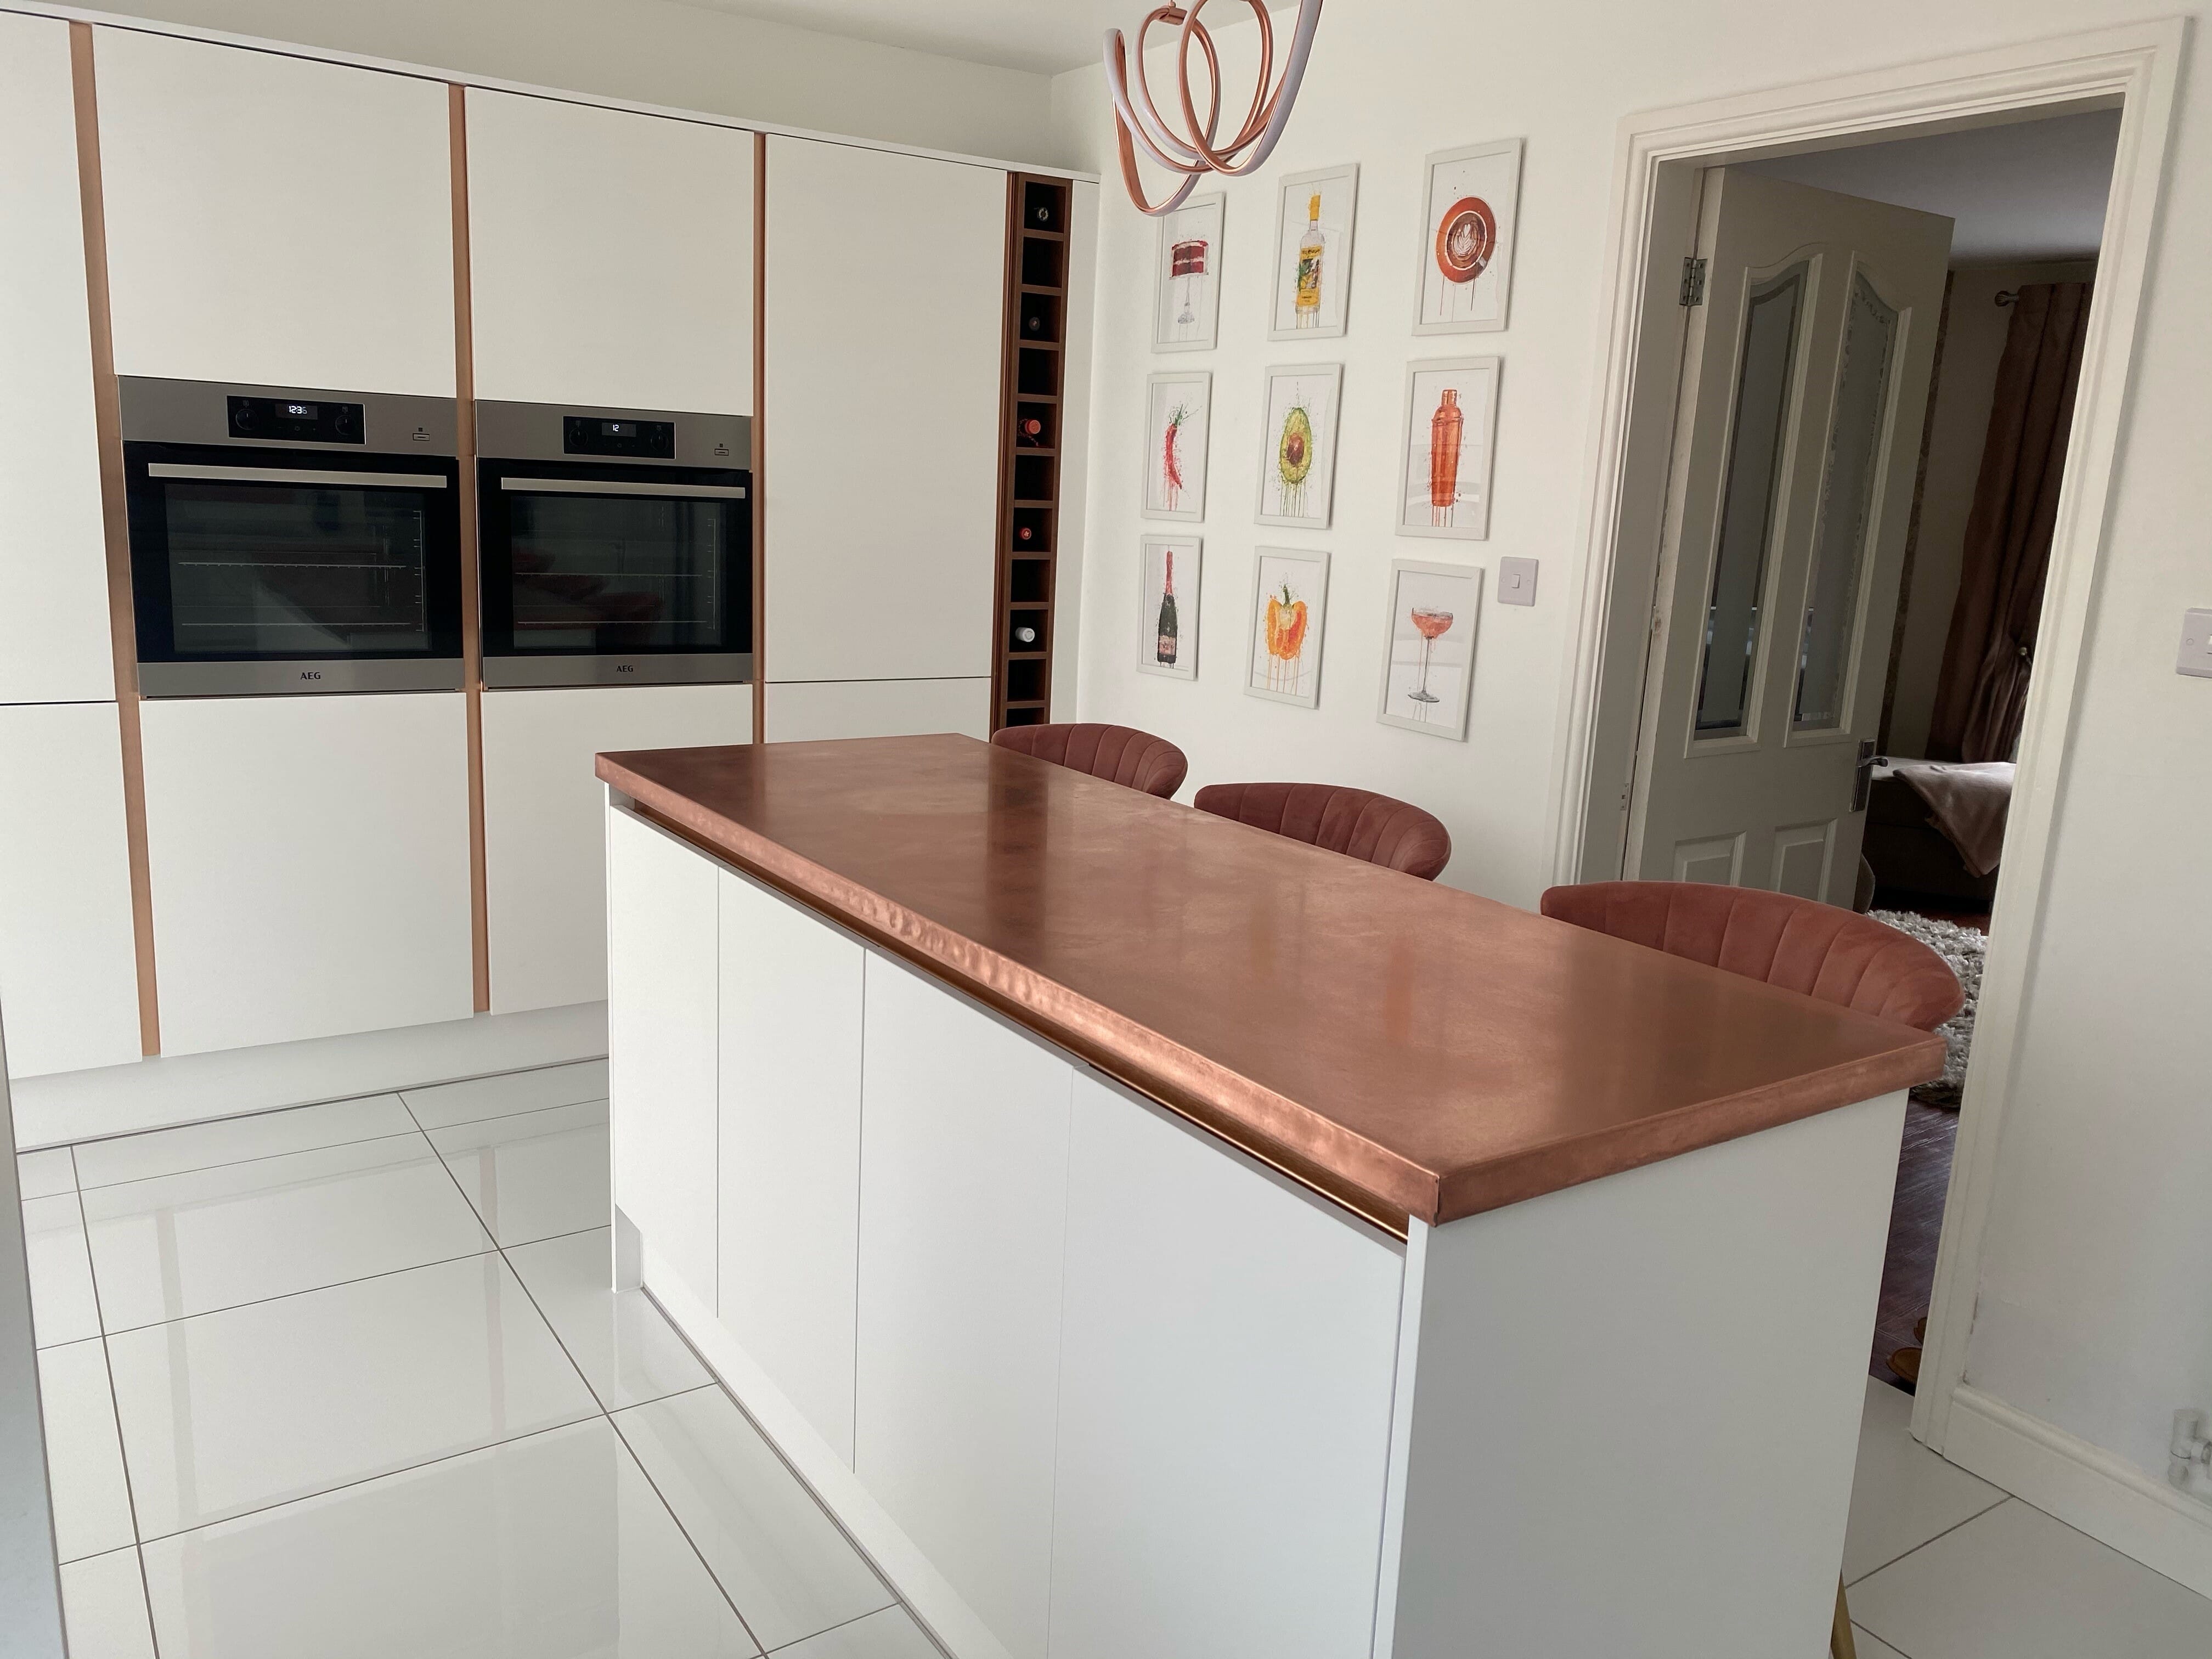 Copper Worktops Are For Sale At UKAA